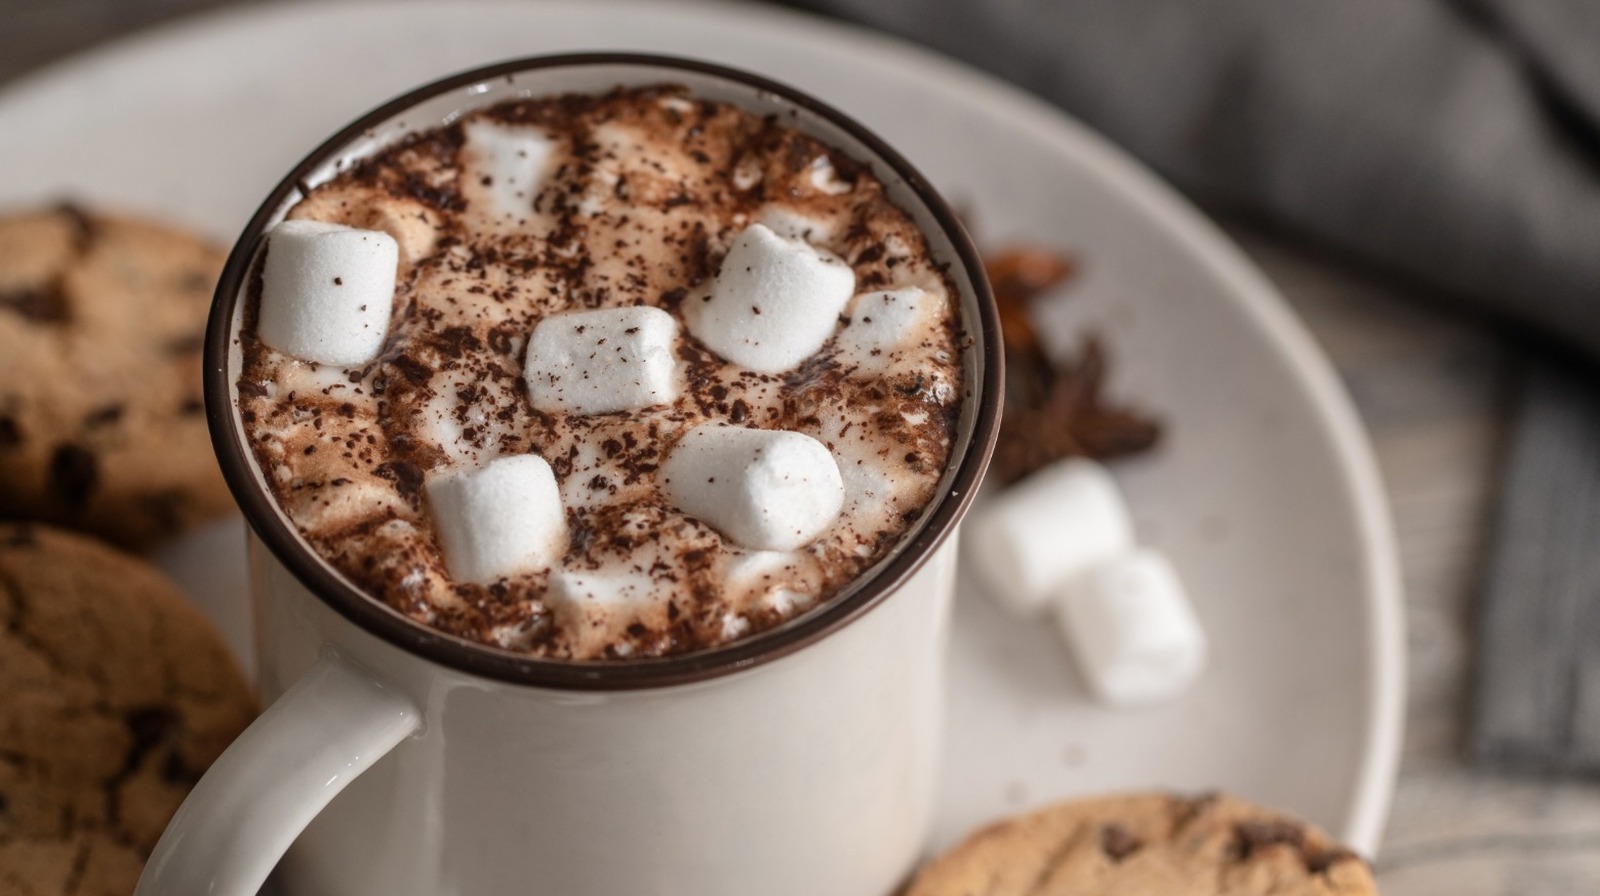 https://www.mashed.com/img/gallery/swap-your-spoon-out-for-a-milk-frother-to-get-fluffier-hot-chocolate/l-intro-1695858647.jpg